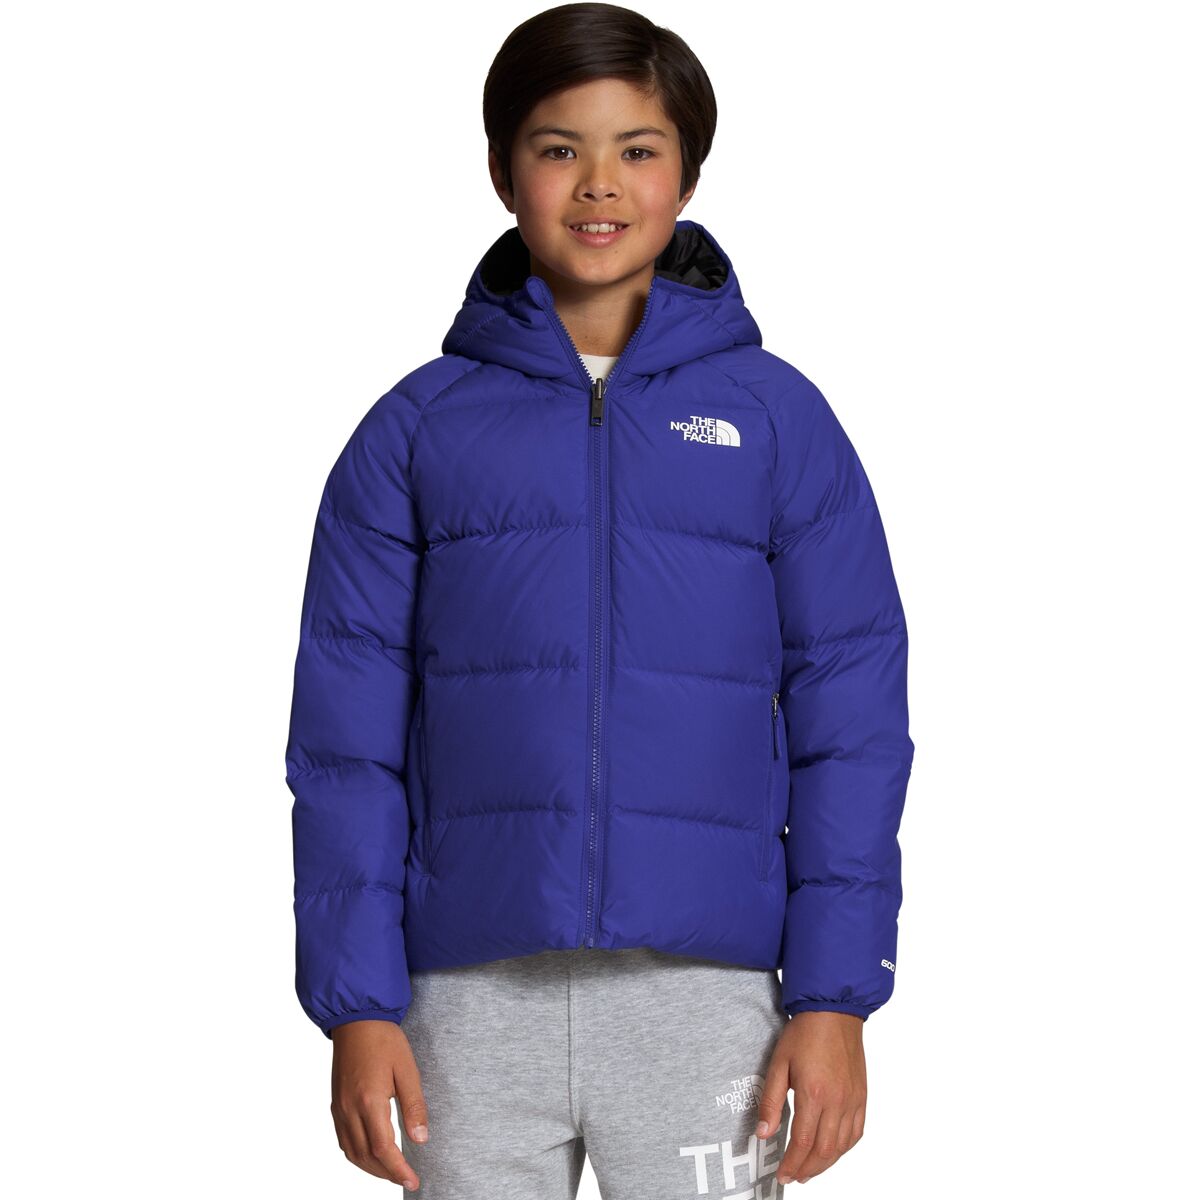 North Down Hooded Reversible Jacket - Boys